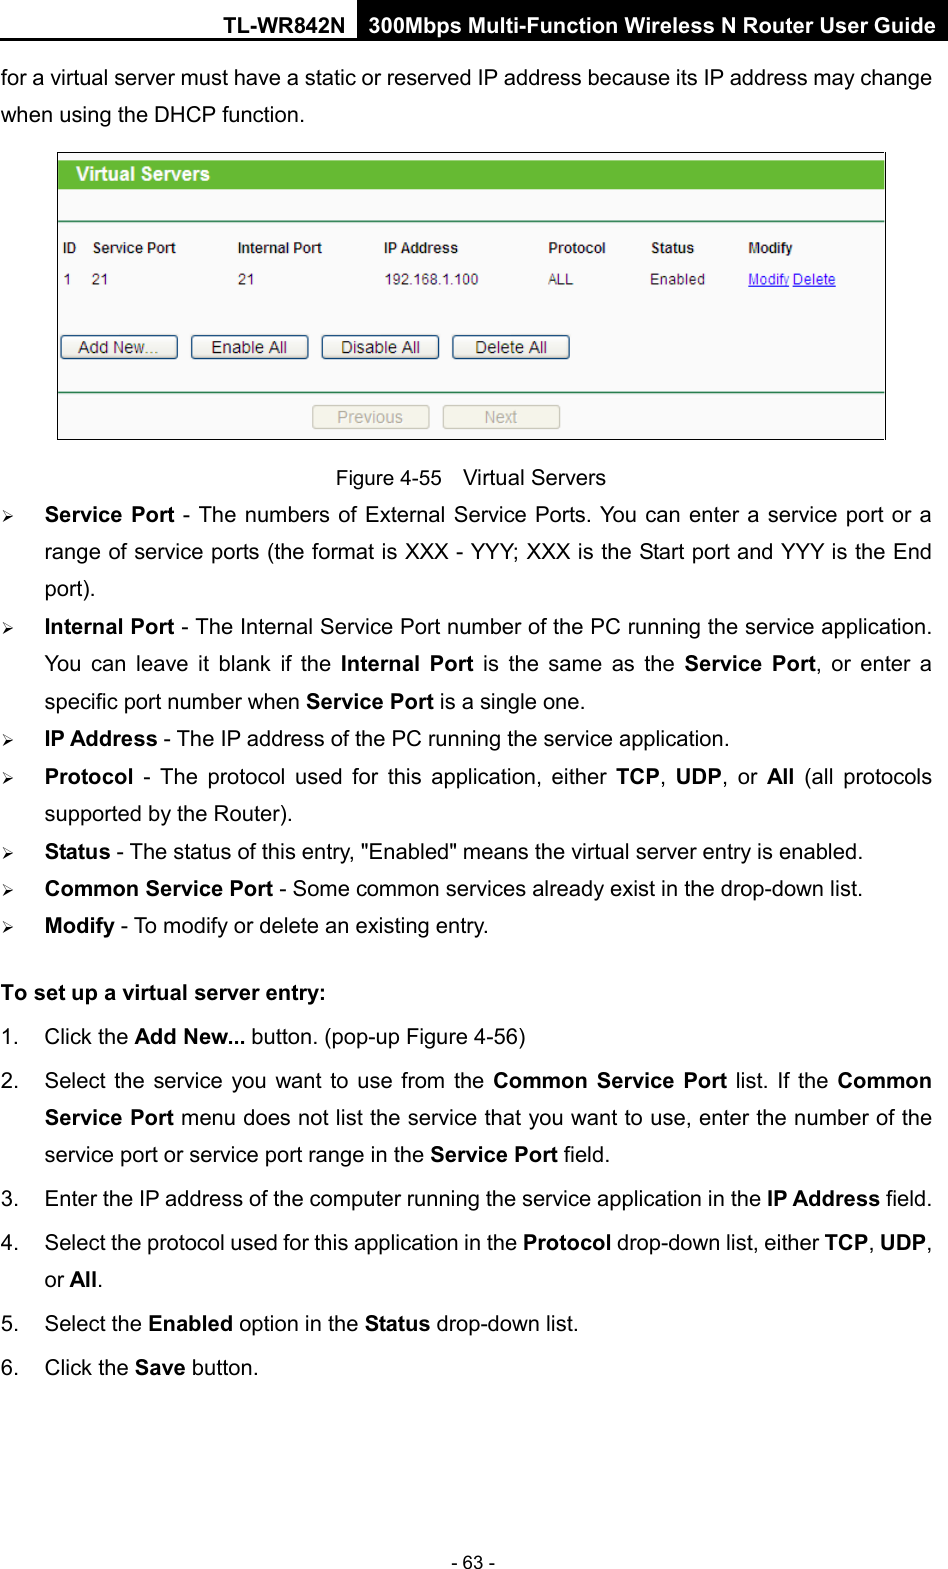 TL-WR842N 300Mbps Multi-Function Wireless N Router User Guide  - 63 - for a virtual server must have a static or reserved IP address because its IP address may change when using the DHCP function.    Figure 4-55  Virtual Servers  Service Port - The numbers of External Service Ports. You can enter a service port or a range of service ports (the format is XXX - YYY; XXX is the Start port and YYY is the End port).    Internal Port - The Internal Service Port number of the PC running the service application. You can leave it blank if the Internal Port is the same as the Service Port, or enter a specific port number when Service Port is a single one.    IP Address - The IP address of the PC running the service application.    Protocol  -  The protocol used for this application, either TCP,  UDP, or All  (all protocols supported by the Router).    Status - The status of this entry, &quot;Enabled&quot; means the virtual server entry is enabled.    Common Service Port - Some common services already exist in the drop-down list.    Modify - To modify or delete an existing entry.   To set up a virtual server entry:   1. Click the Add New... button. (pop-up Figure 4-56) 2. Select the service you want to use from the Common Service Port list. If the Common Service Port menu does not list the service that you want to use, enter the number of the service port or service port range in the Service Port field.   3. Enter the IP address of the computer running the service application in the IP Address field.   4. Select the protocol used for this application in the Protocol drop-down list, either TCP, UDP, or All.   5. Select the Enabled option in the Status drop-down list.   6. Click the Save button.   